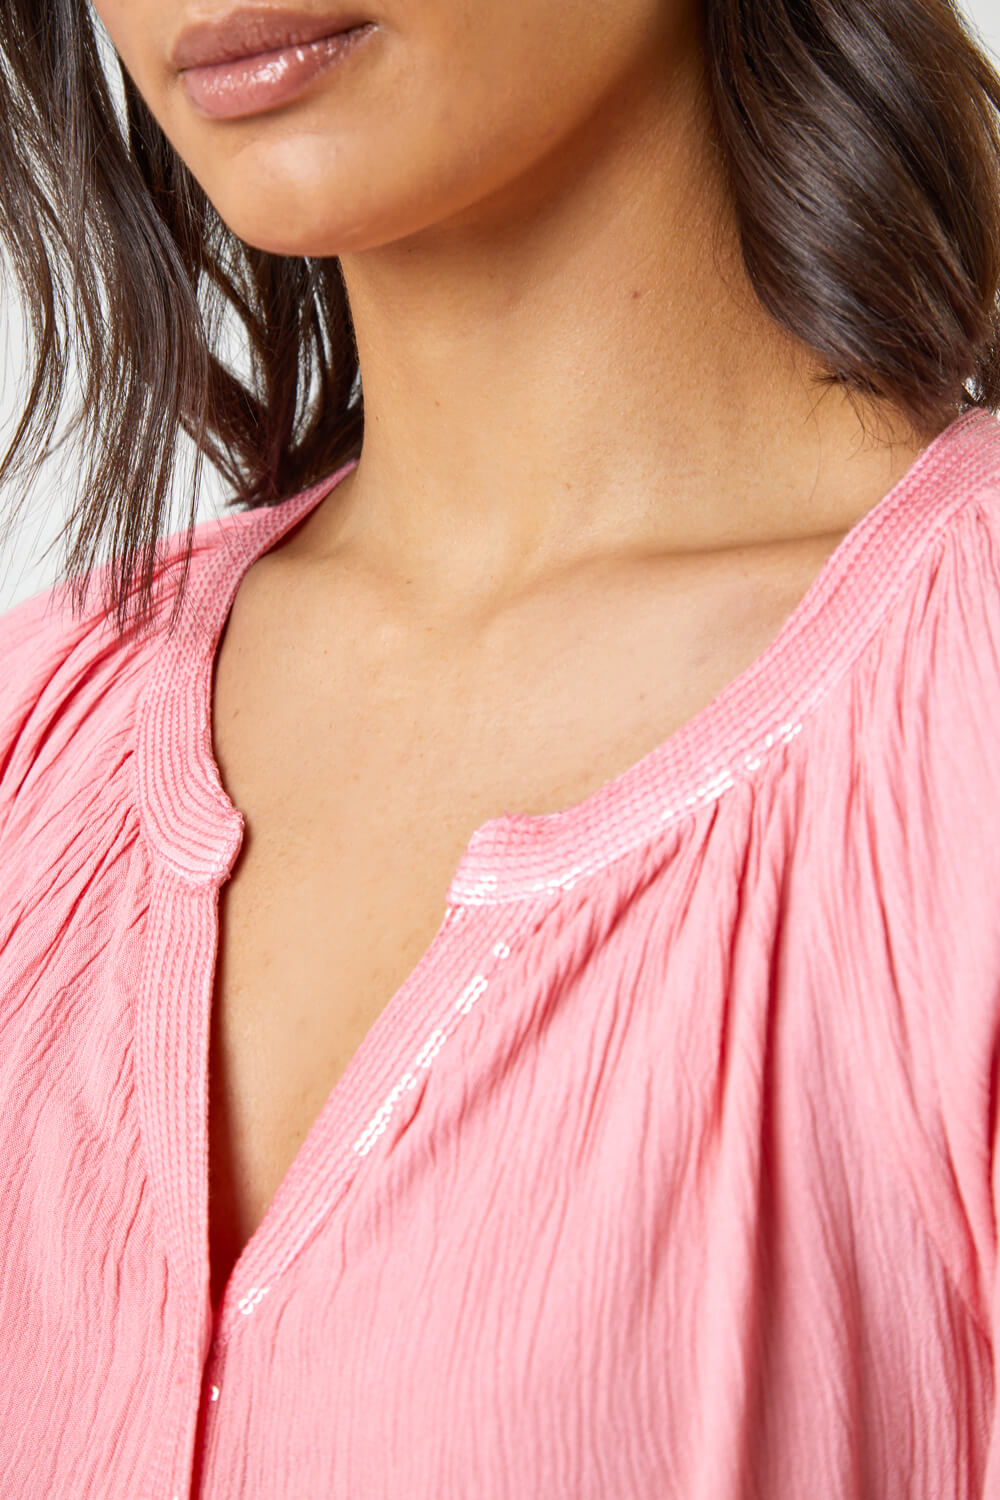 PINK Sequin Embellished Ombre Blouse, Image 4 of 5